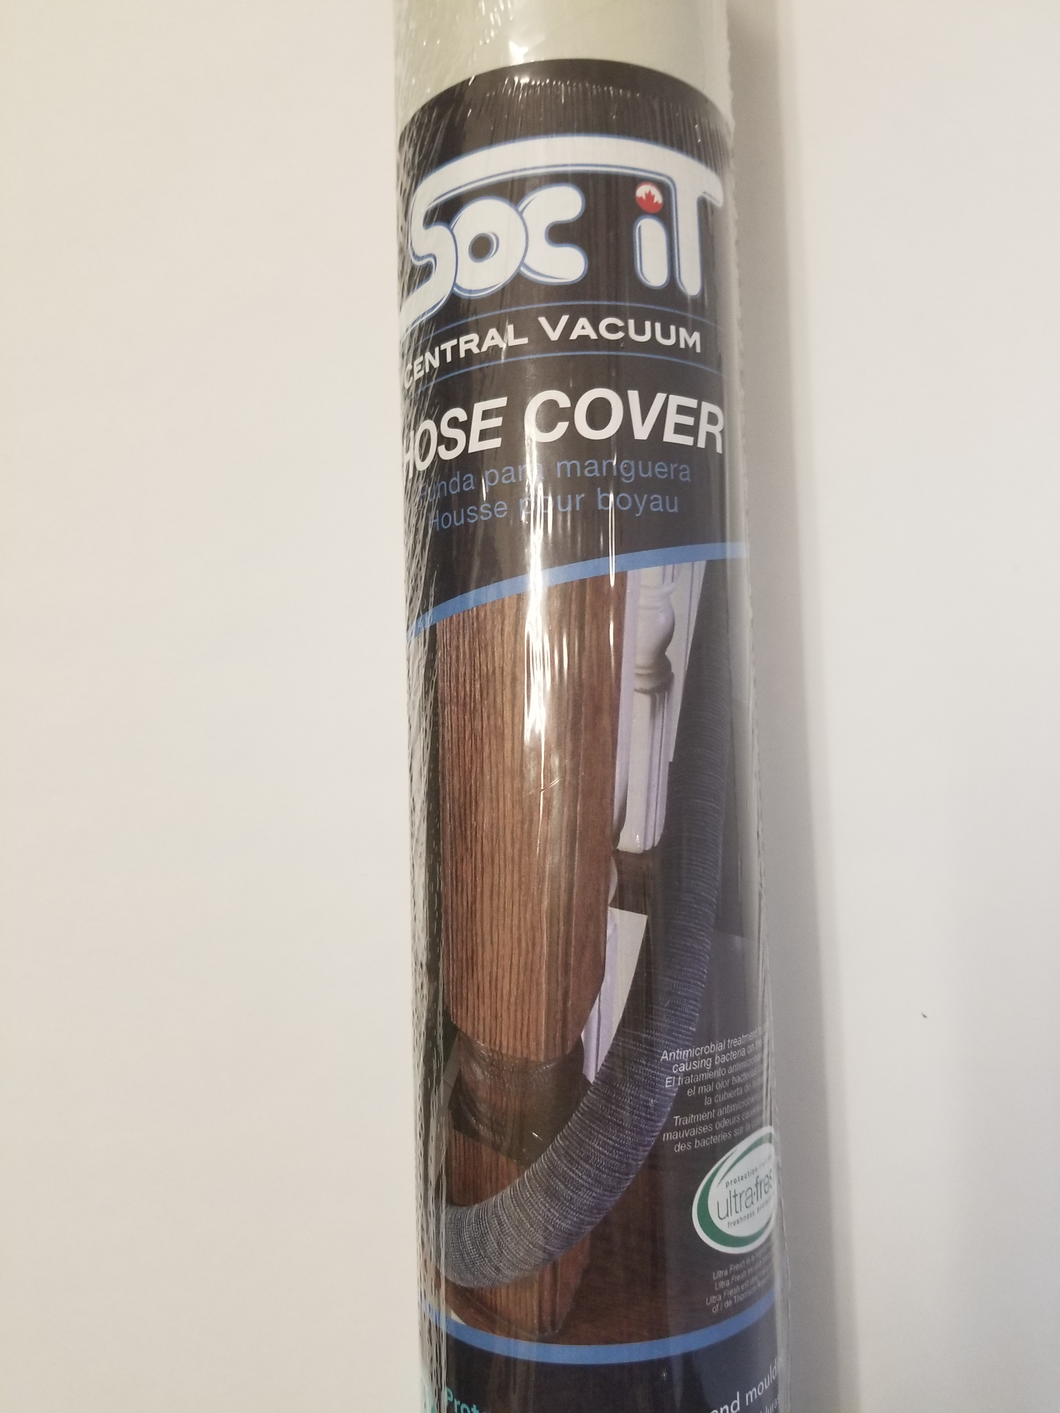 Soc It Central Vacuum Hose Cover 30 ft. - Quality Household Supply